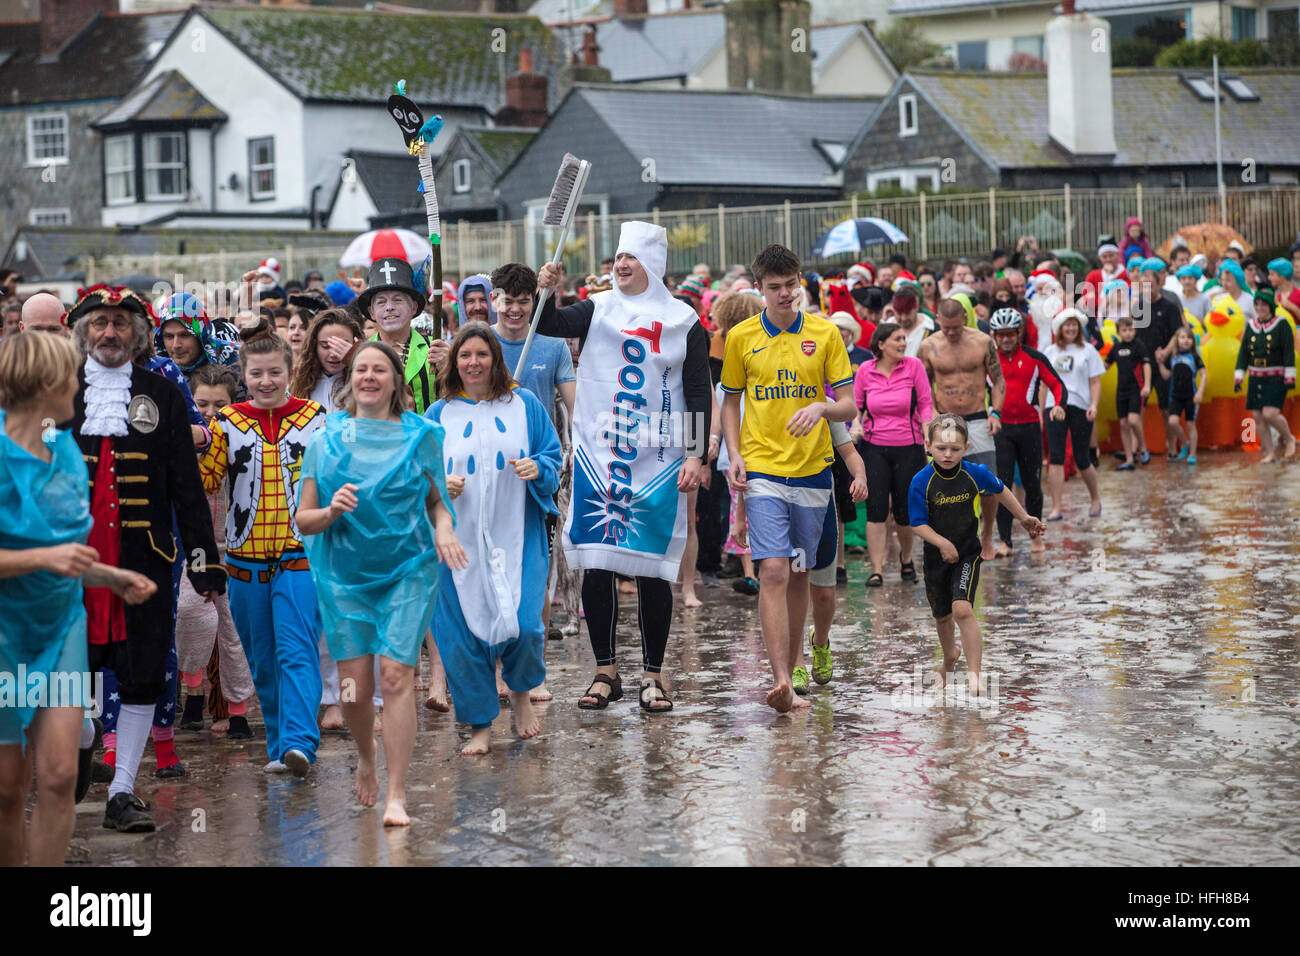 Hundreds turned out in fancy dress despite the rain to take part in the 'Lyme Lunge' - a New Year's Day swim in Lyme Regis 2016 Stock Photo